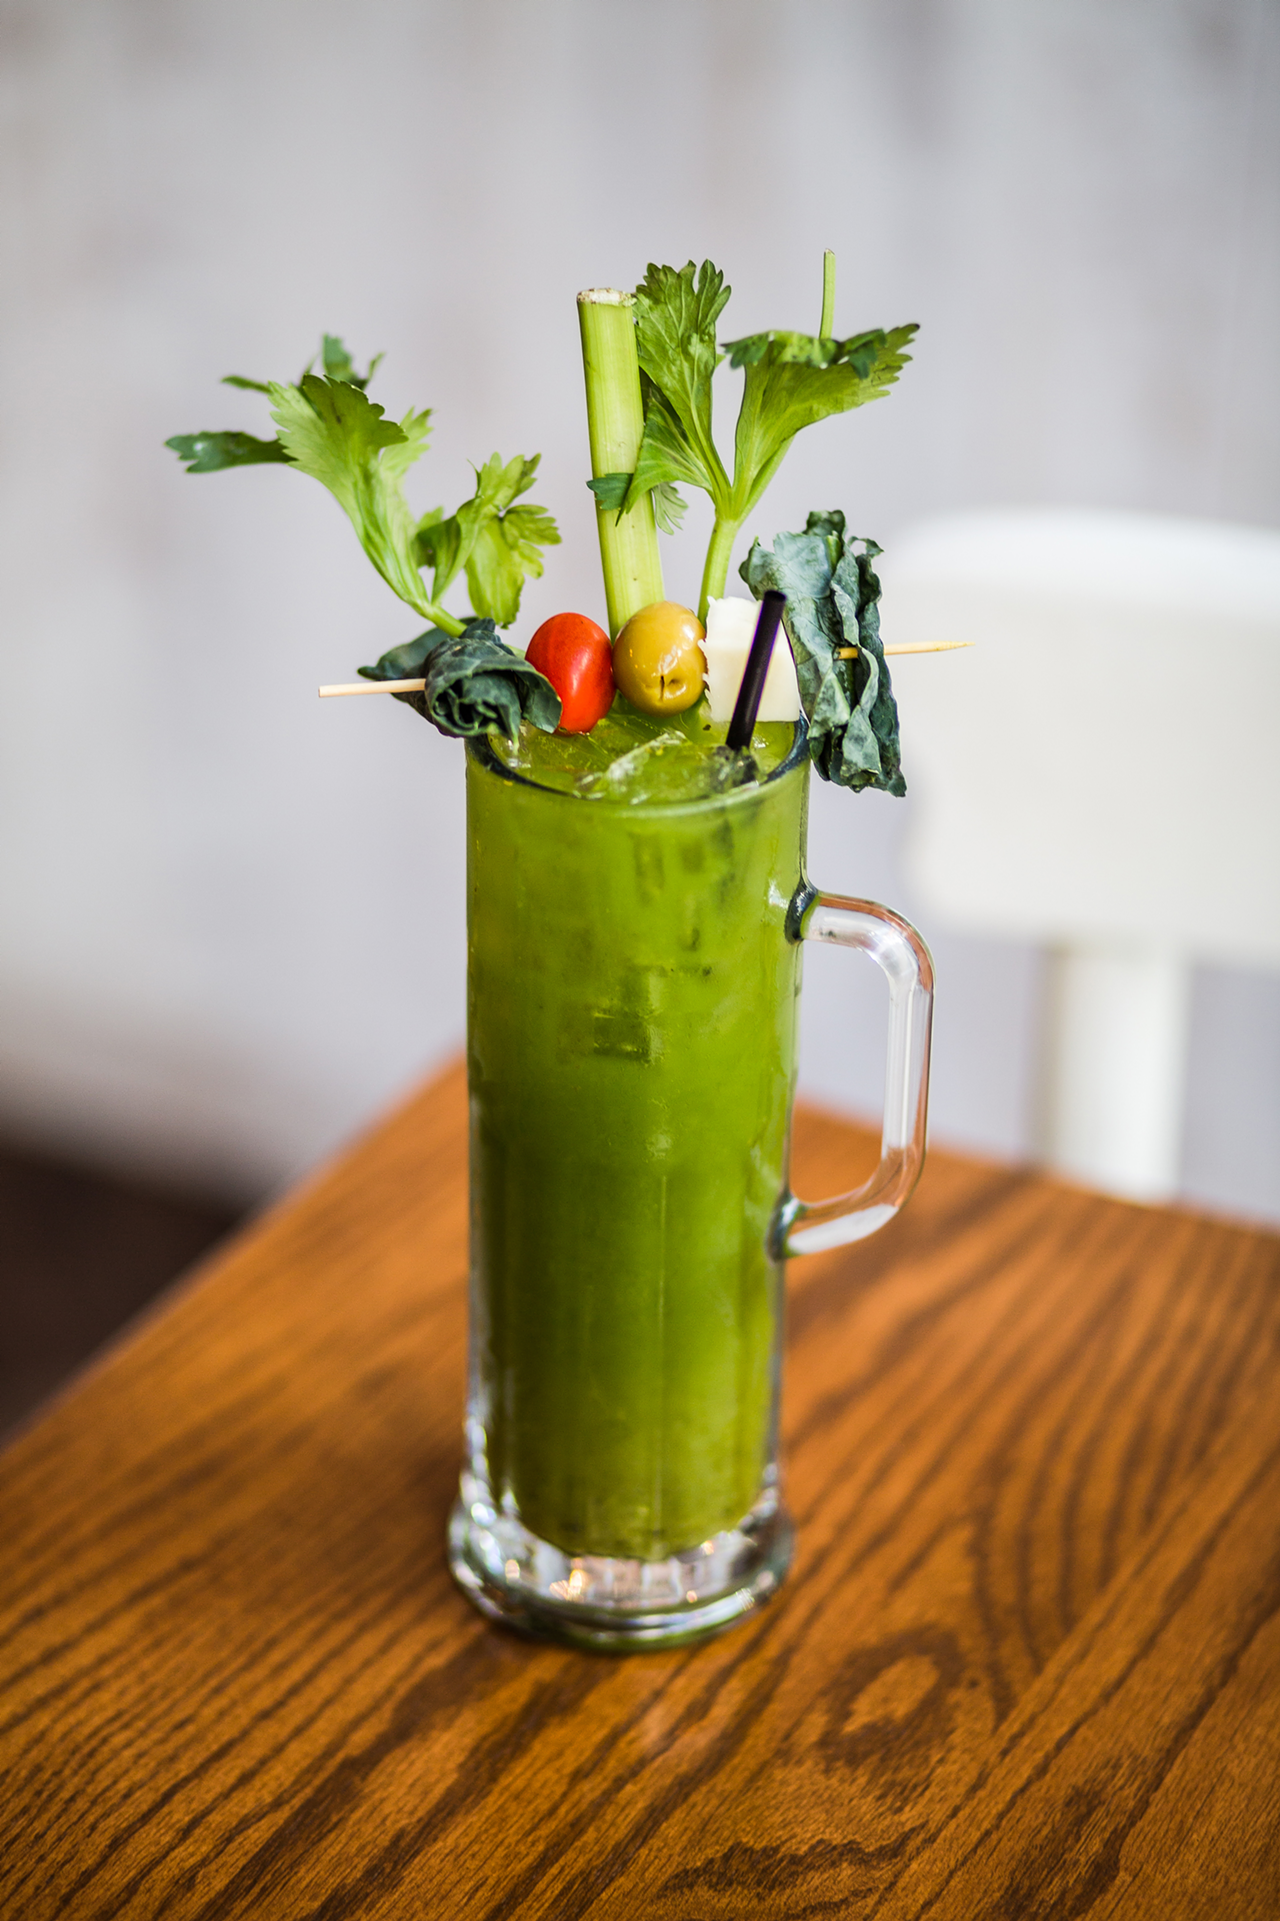 Maplewood Kitchen and Bar // Maplewood’s Roasted Tomatillo Bloody switches it up by going green. Tito’s vodka is blended with housemade roasted tomatillo bloody mary mix and house-pressed, earthy Super Green juice (spinach, pineapple, romaine, kale, parsley, celery), served with a garnish of kale, an olive, a cheese cube, tomato and celery. 525 Race St., Downtown, maplewoodkitchenandbar.com.